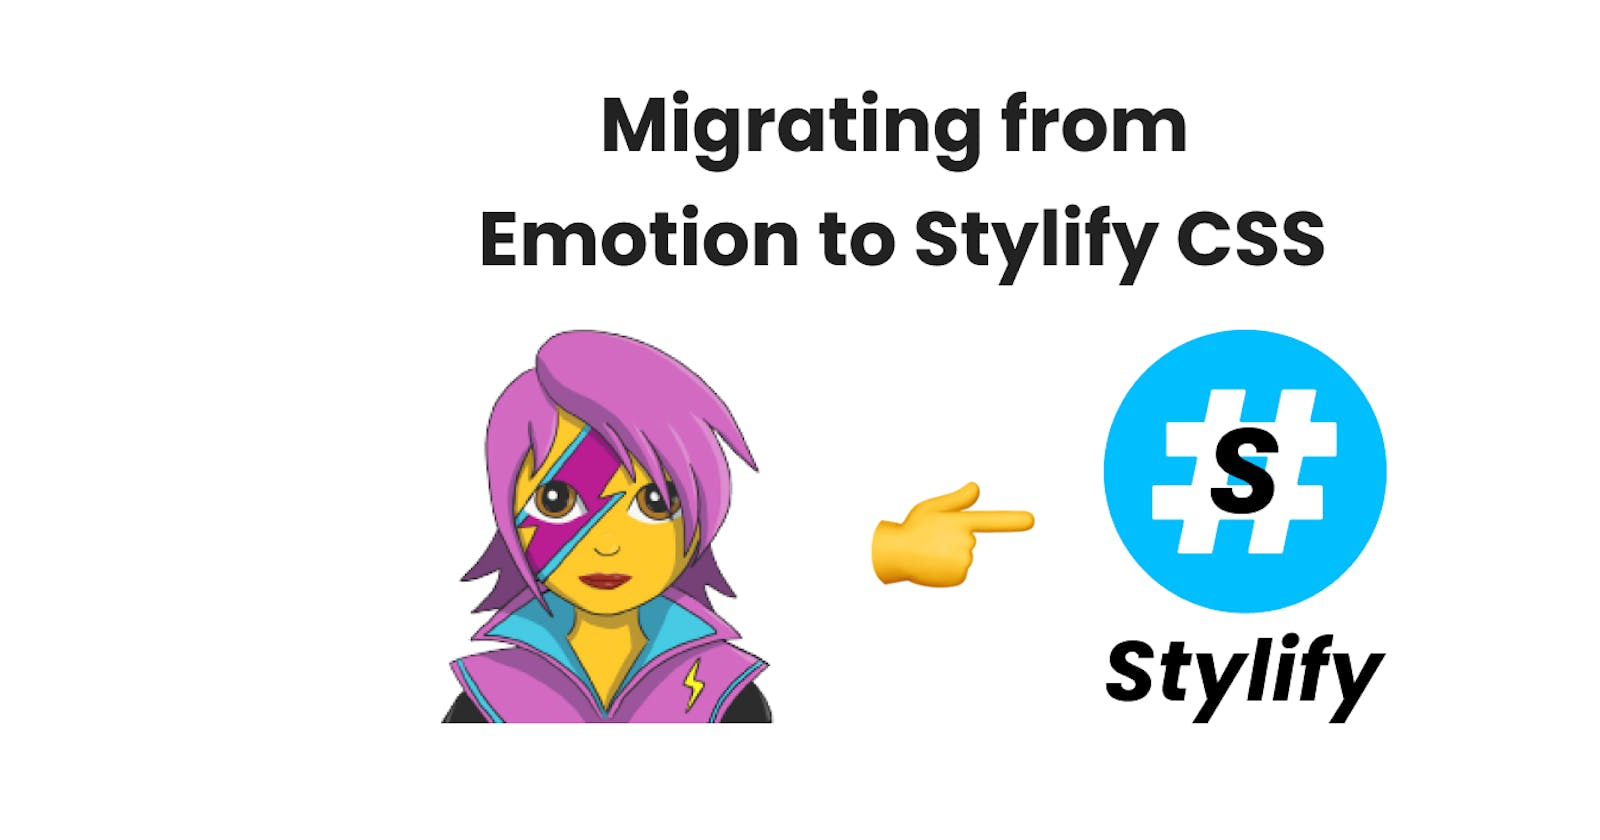 Faster React apps coding: How to migrate from Emotion CSS-in-JS to Stylify Utility-First CSS